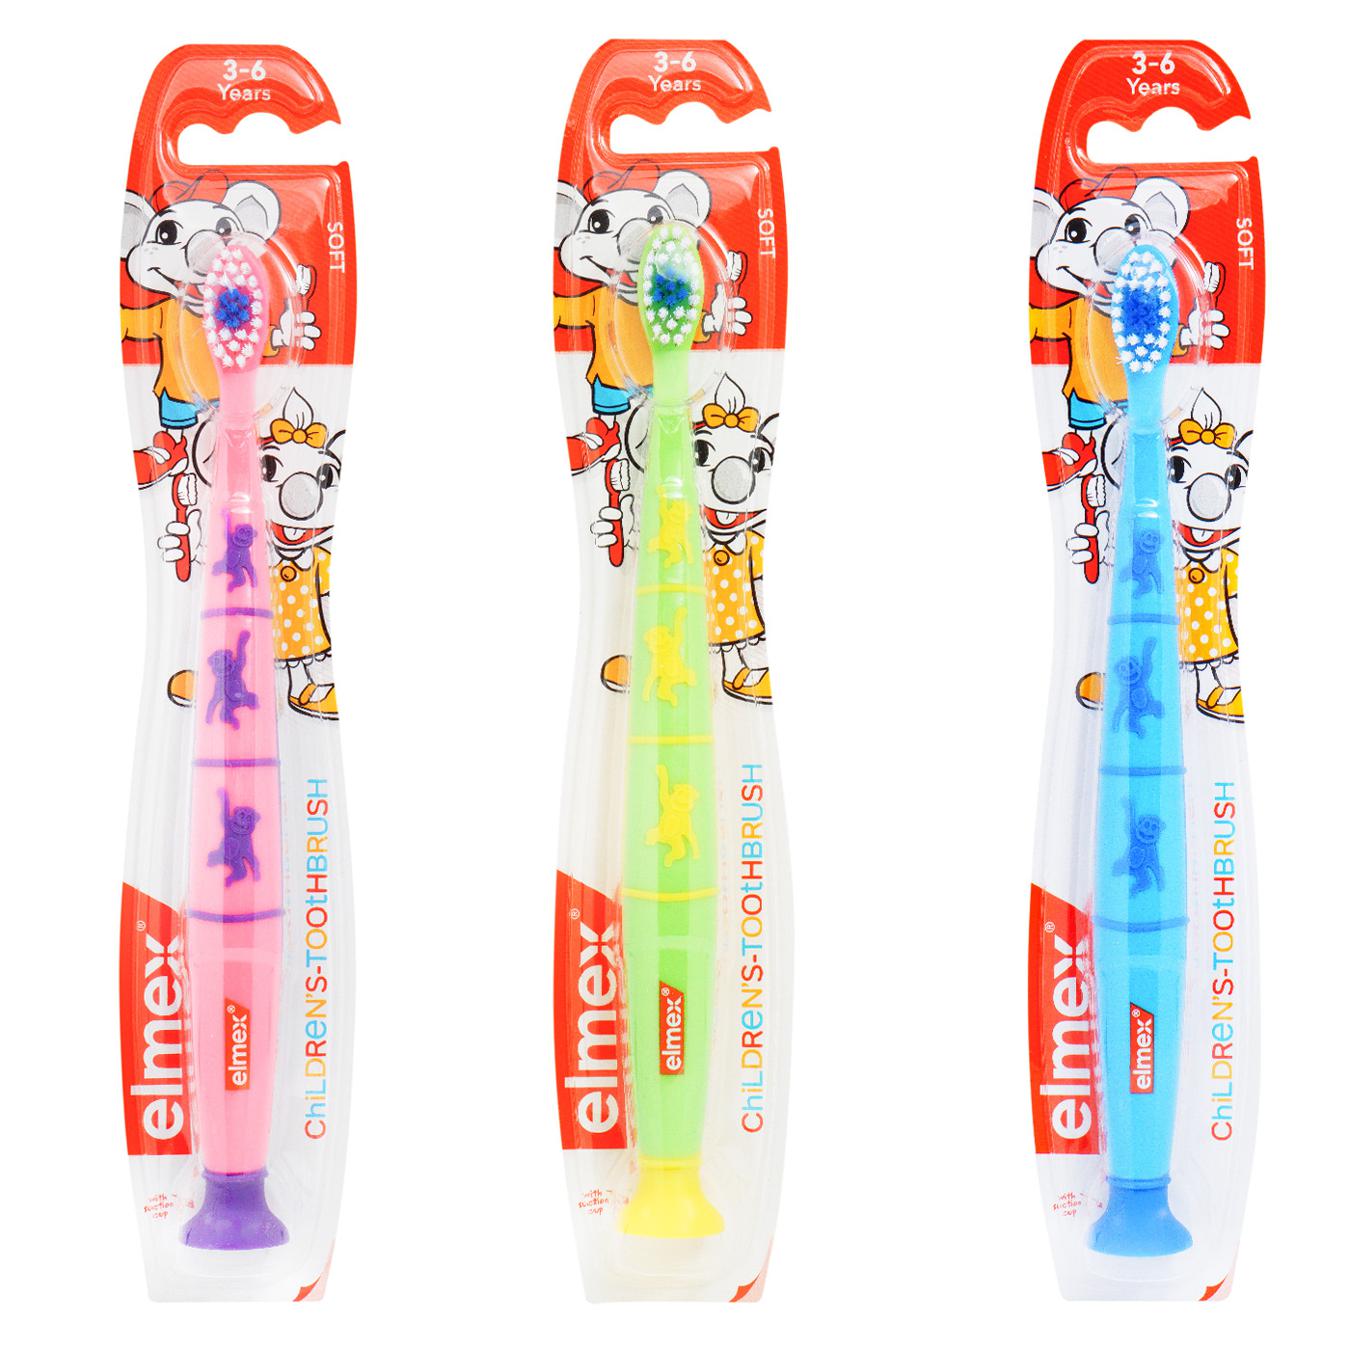 Elmex toothbrush for children from 3 to 6 years is soft 2